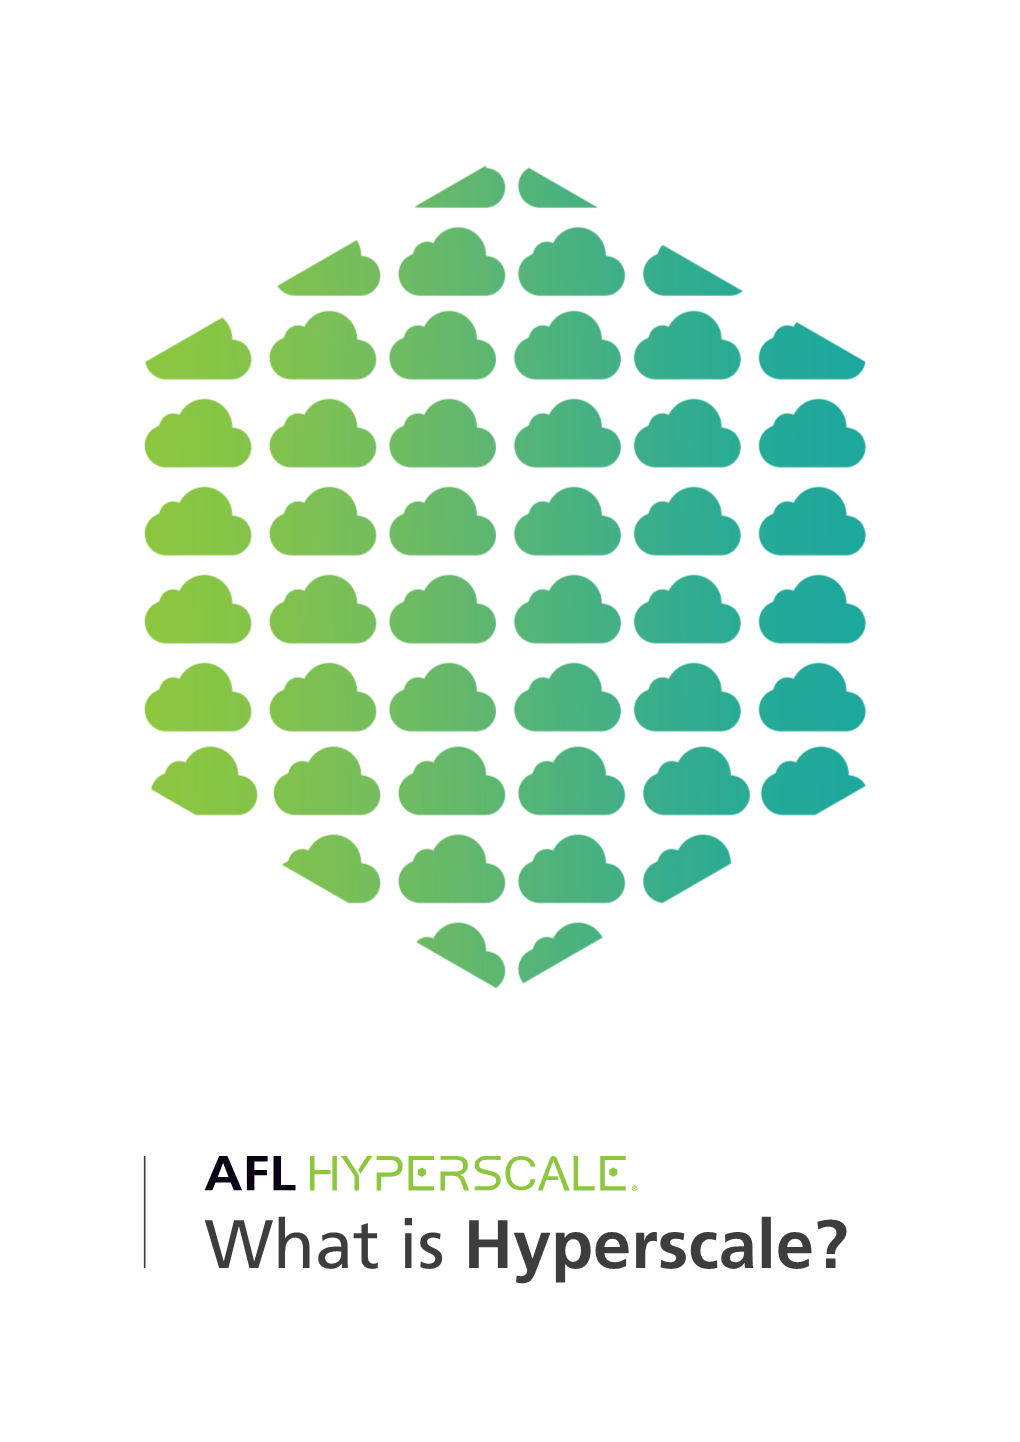 What Is Hyperscale? Contents